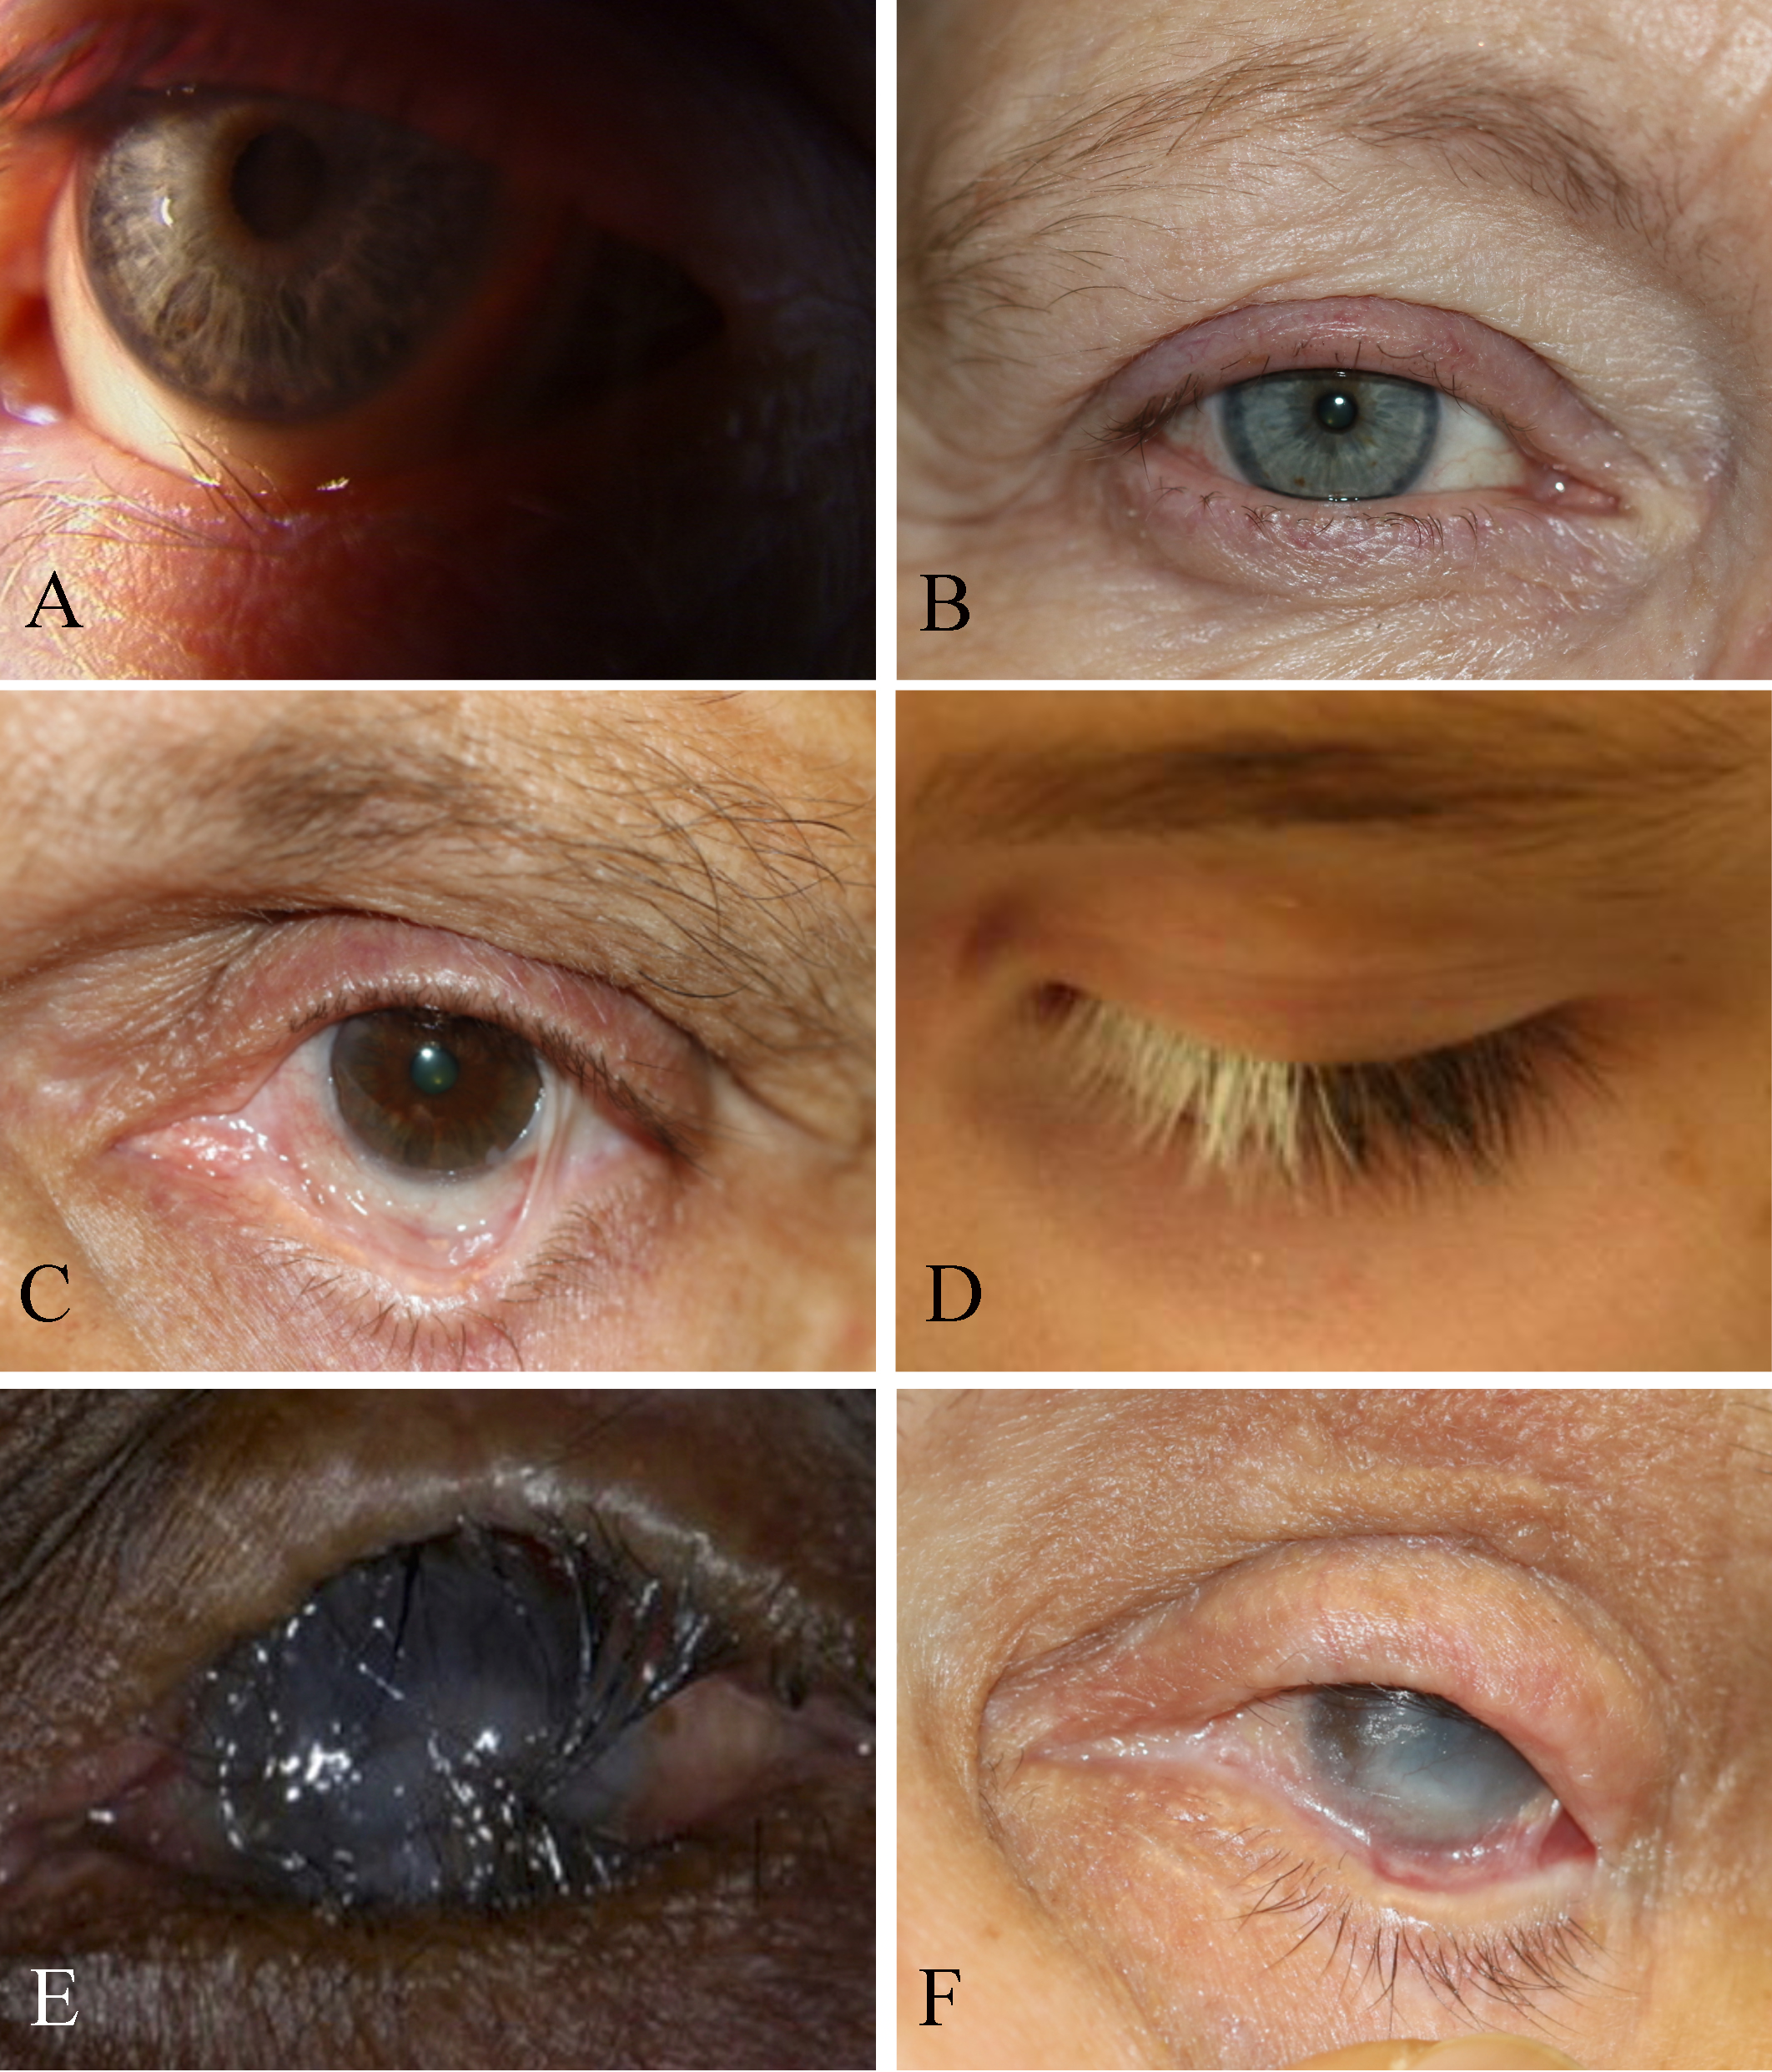 A.	Trichiasis. The eyelid itself is not turning in but the lashes are pointing inwards.
B.	Madarosis. Short stubby lashes of different sizes indicates trichotillomania
C.	Symblepharon with secondary trichiasis, fornix shortening, cicatricial entropion
D.	Poliosis
E.	Trachoma with corneal opacification
F.	Pemphigoid disease with cicatricial entropion, trichiasis, ankyloblepharon, corneal scarring, dry eye
